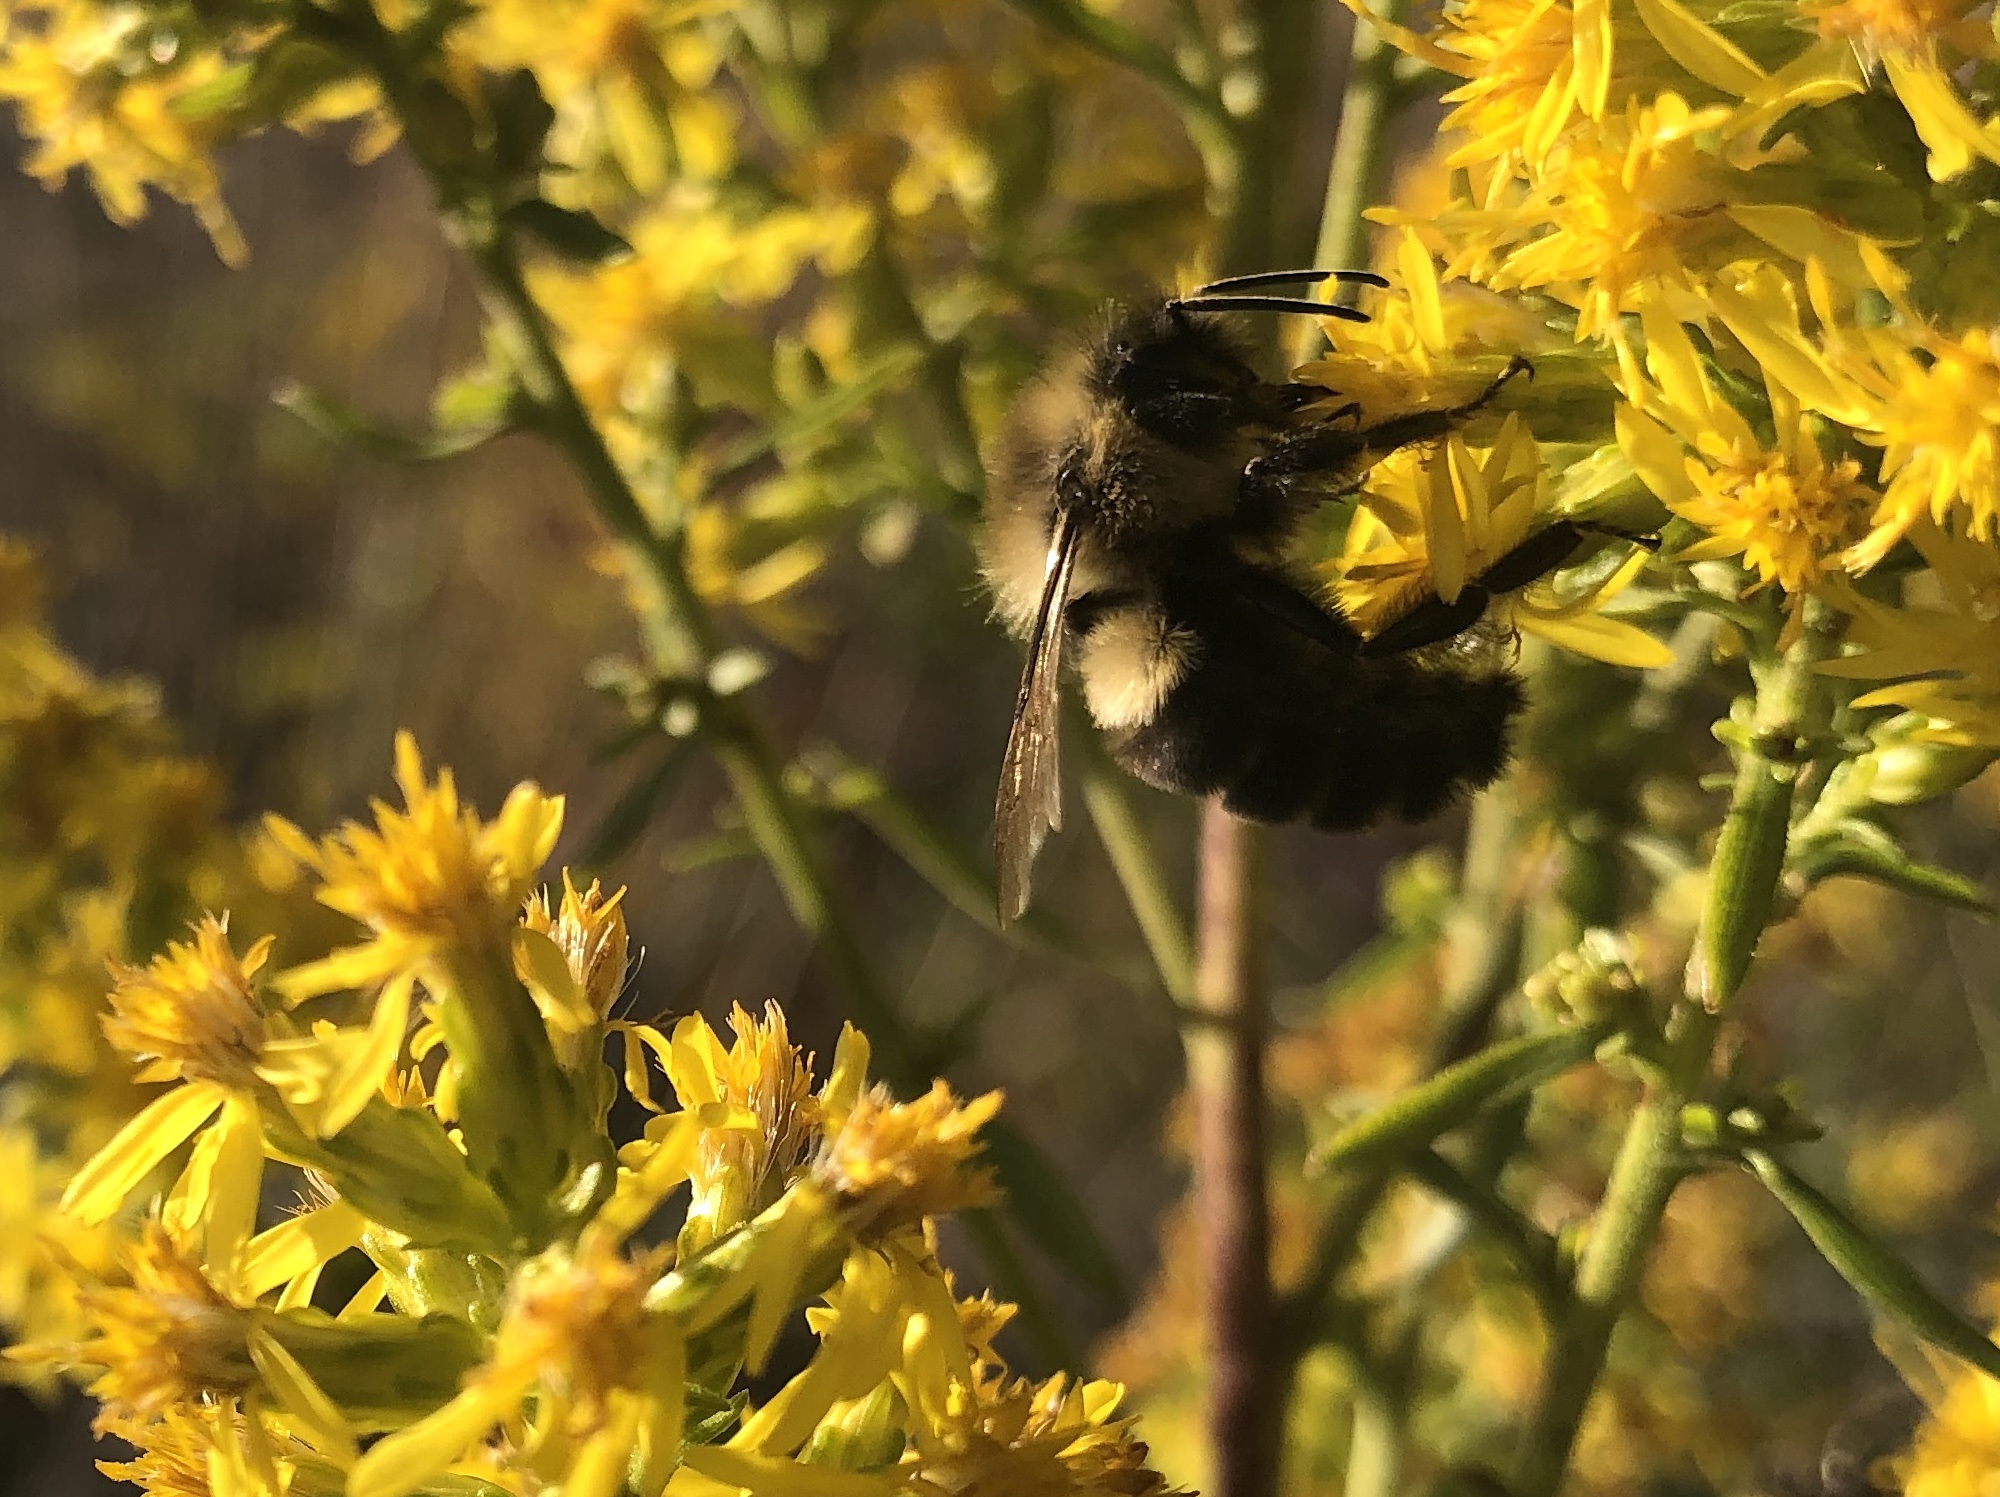 Bumblebee on Showy Goldenrod on October 13, 2020.